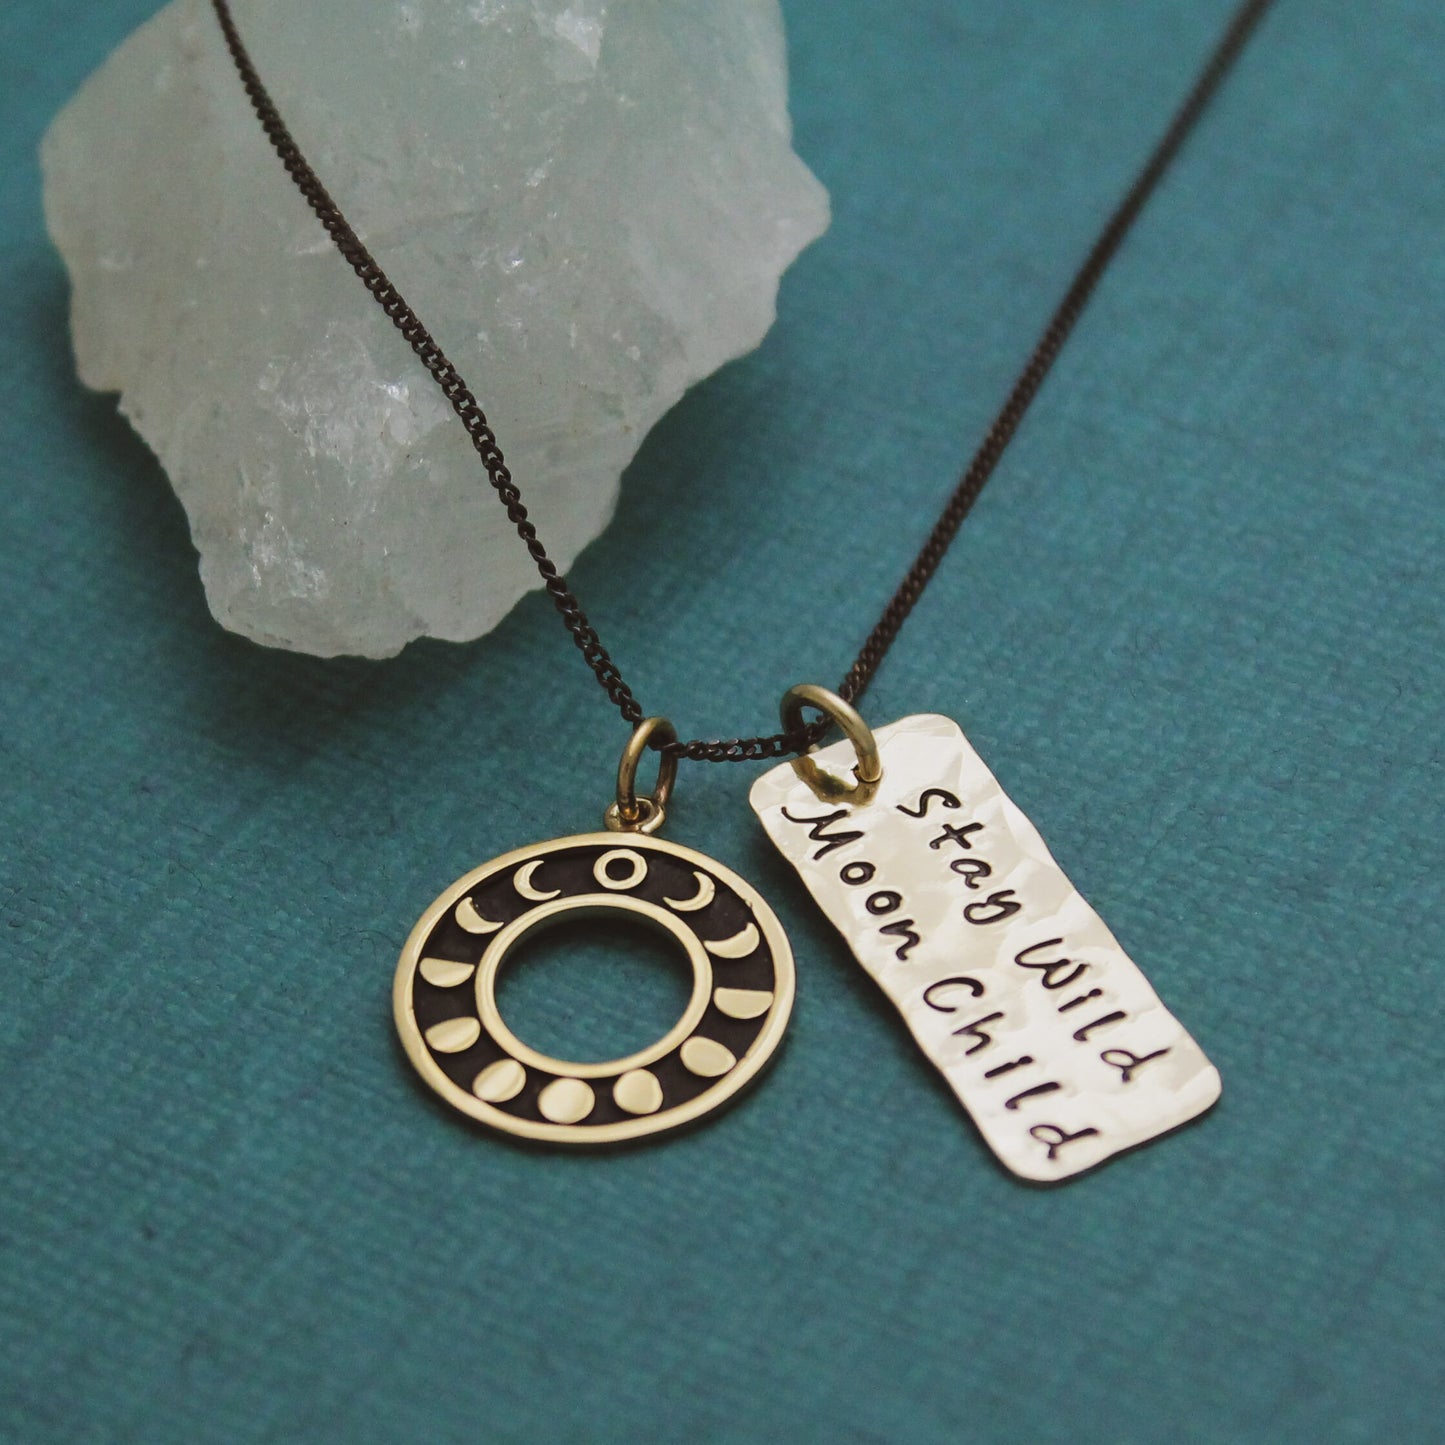 Stay Wild Moon Child Moon Phases Necklace, 14K Gold & Bronze, Celestial Jewelry, Oxidized Black Chain, Black and Gold Necklace, Gift for Her